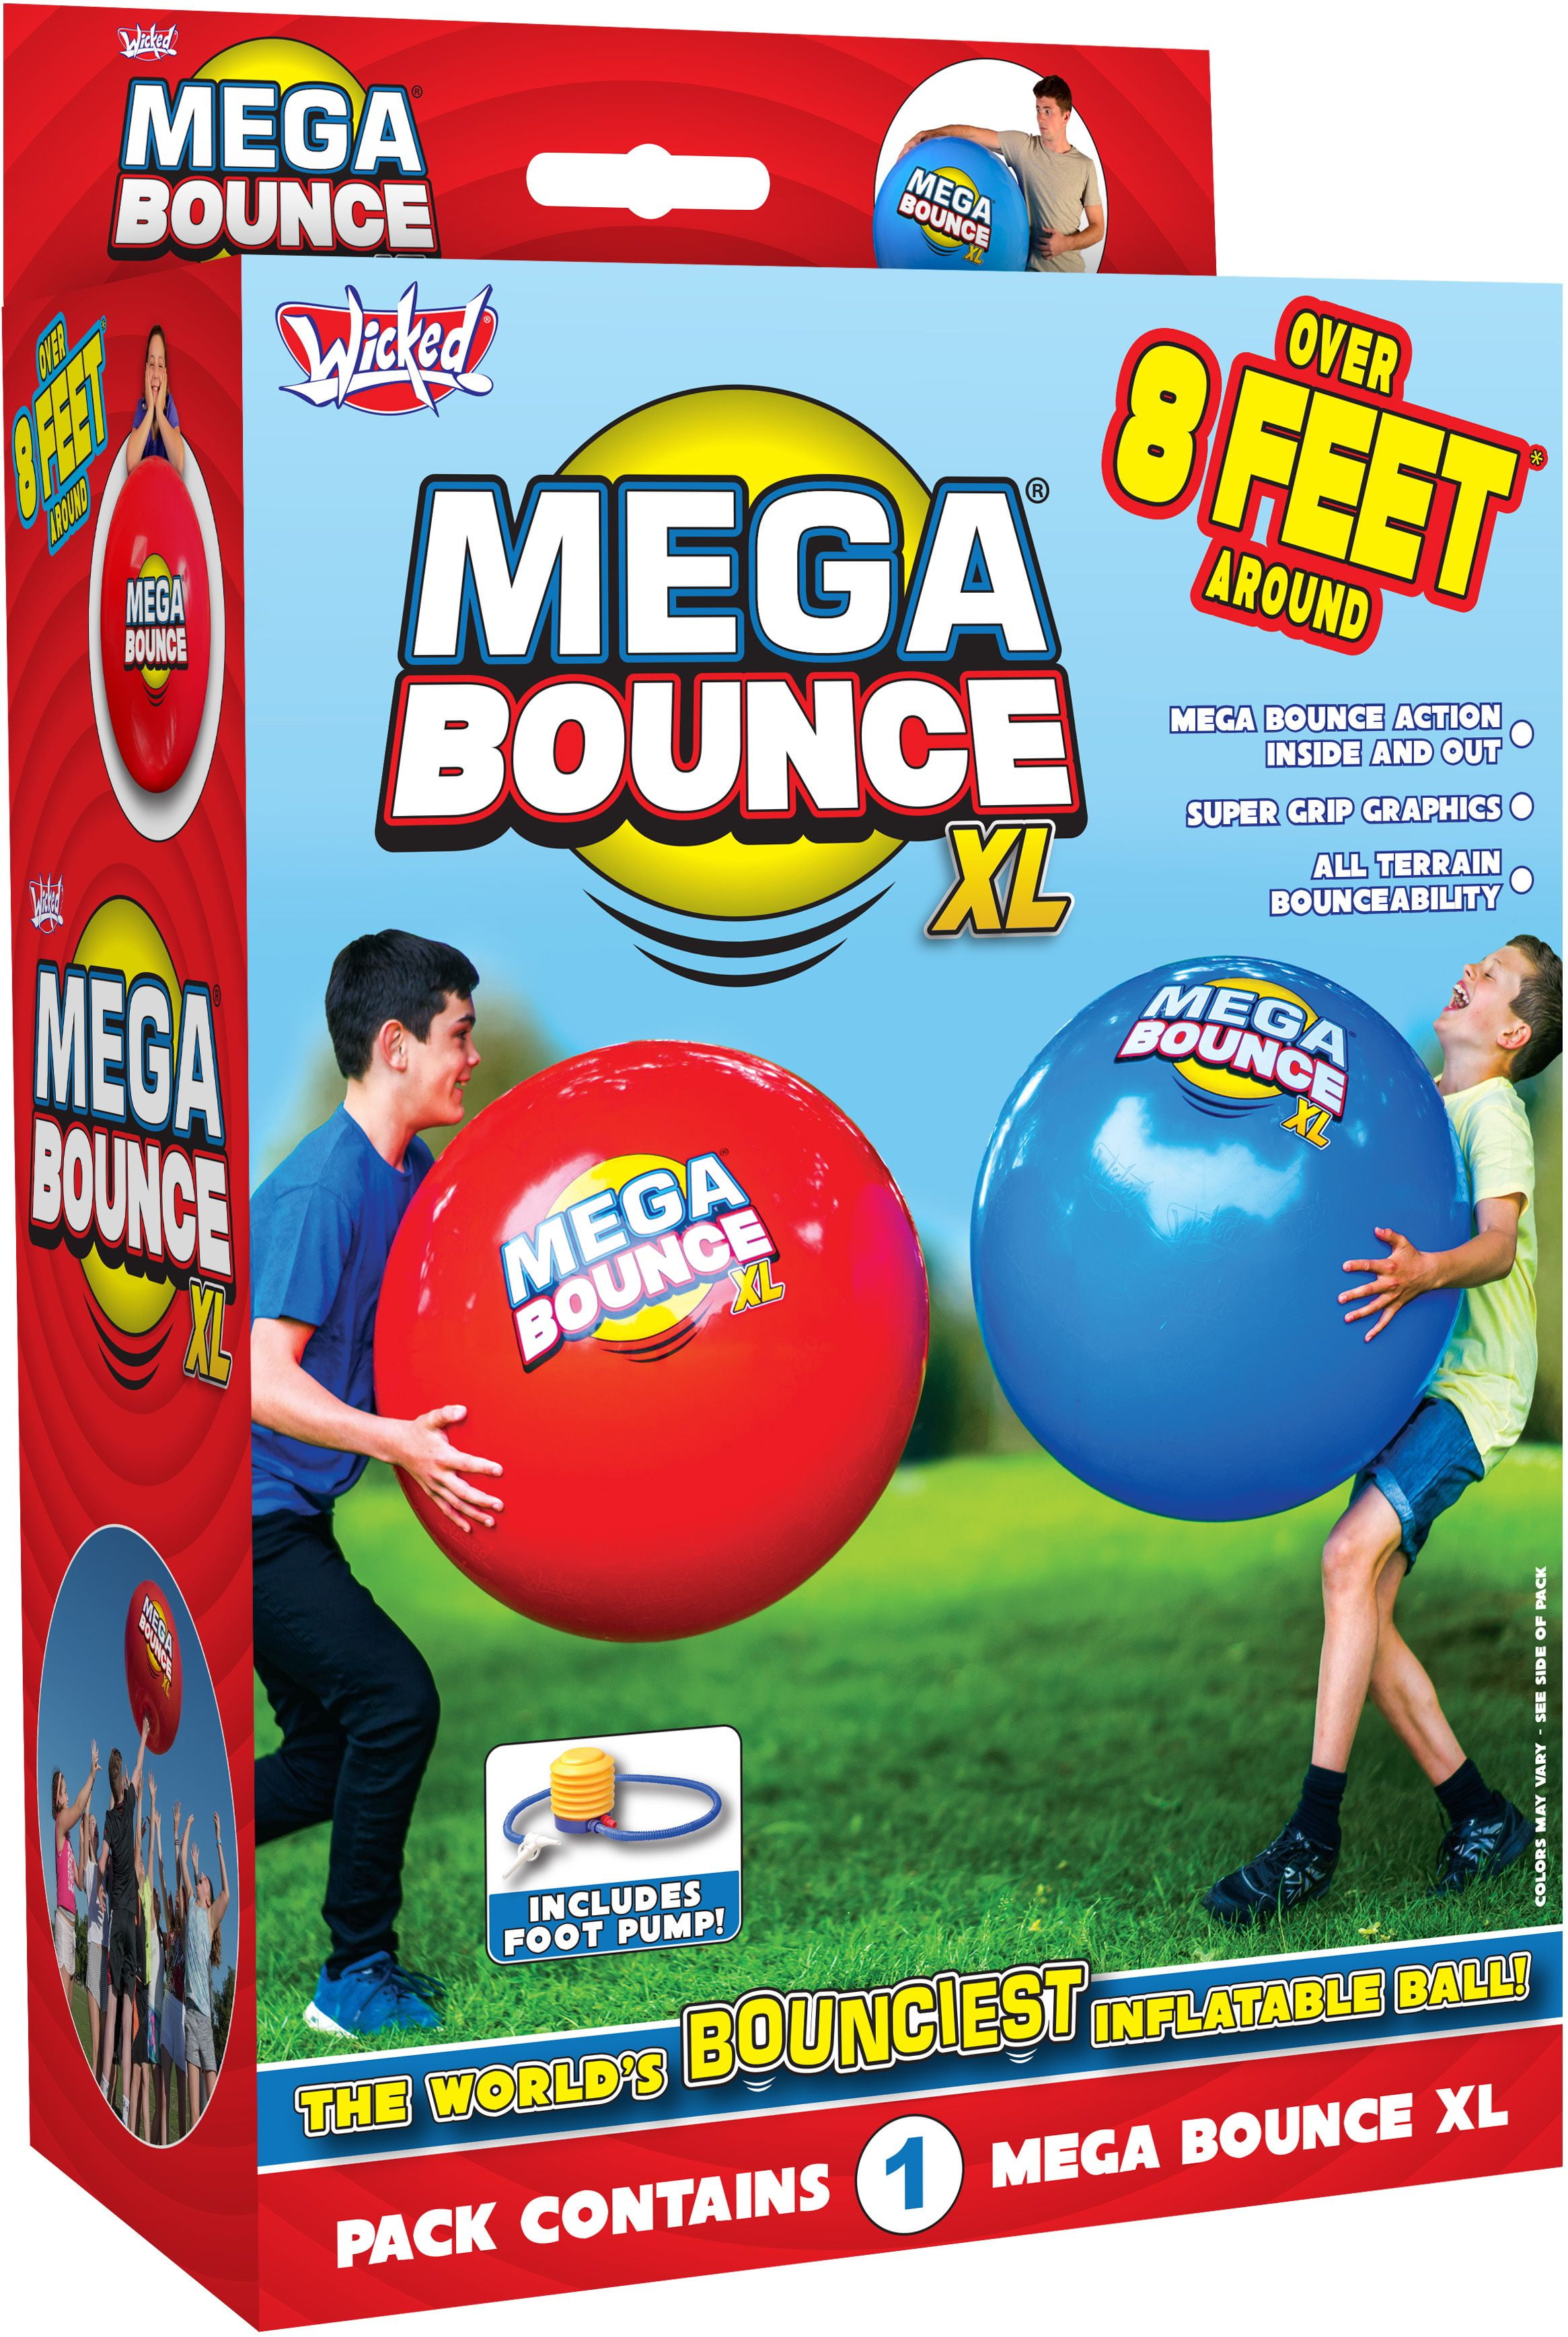 Wicked Springball Mega Bounce XL in rot oder blau 